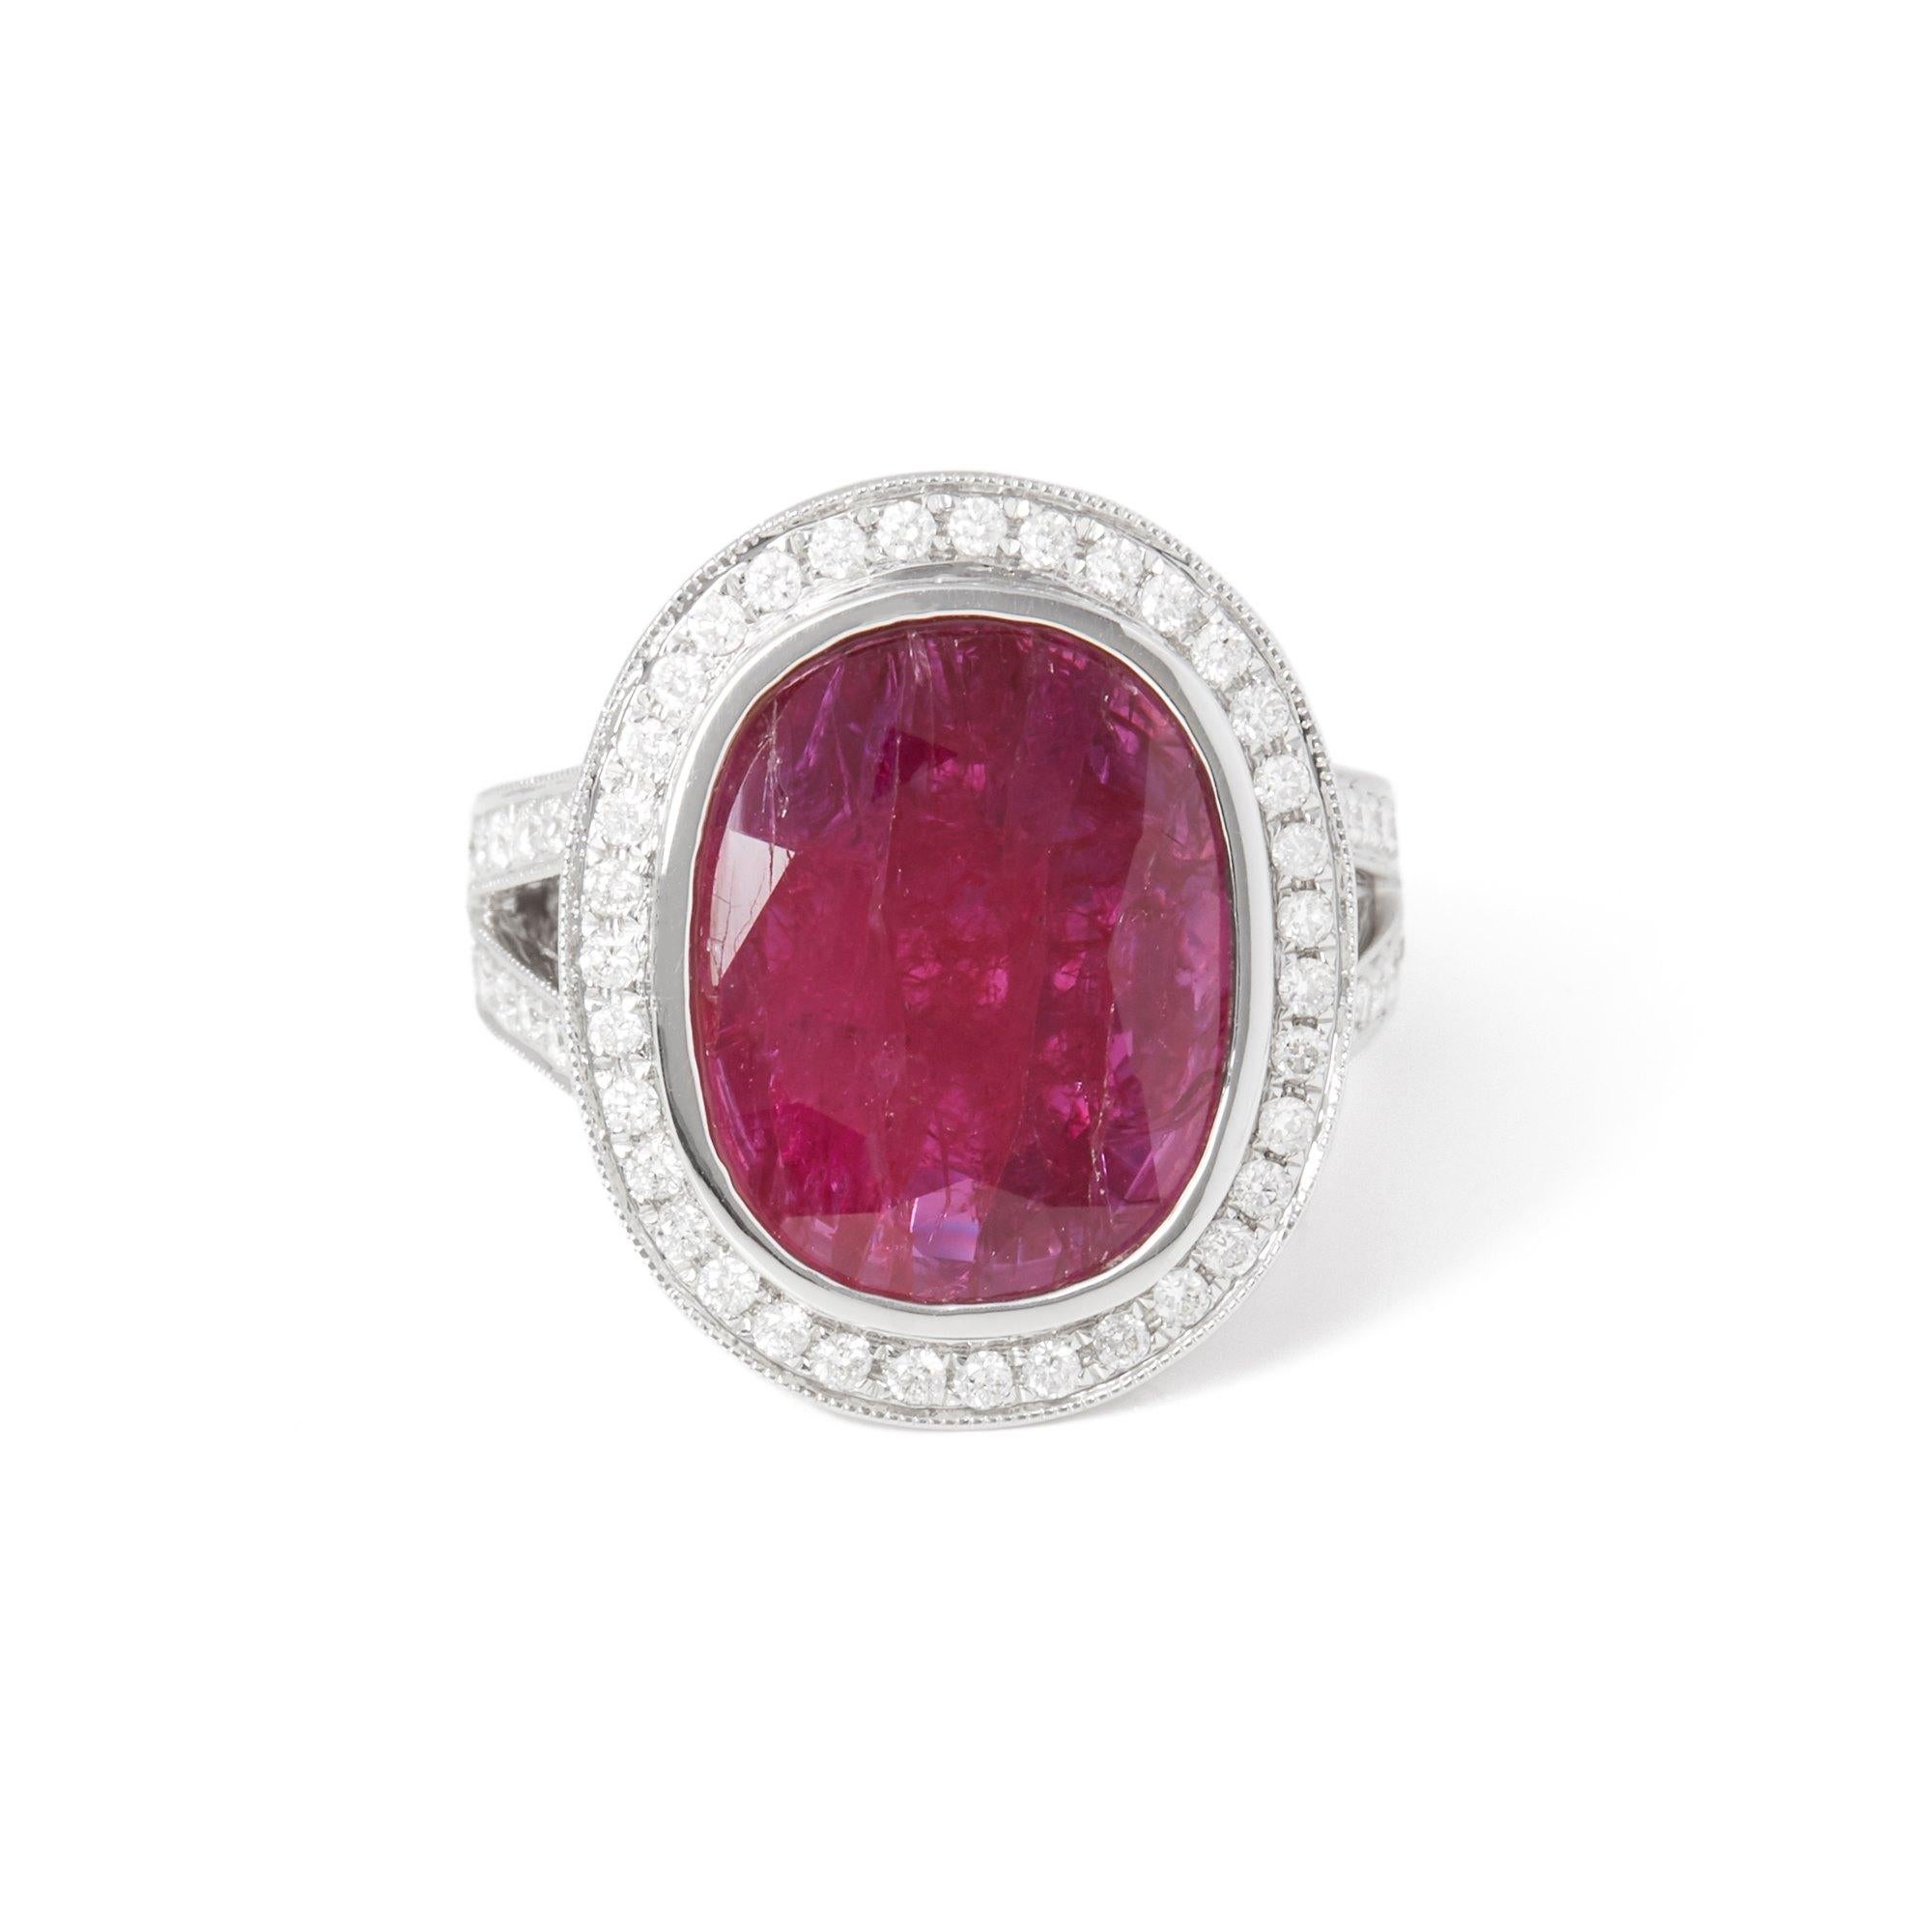 This ring designed by David Jerome is from his private collection and features one oval cut Ruby totalling 7.10cts sourced in Burma. Set with round brilliant cut Diamonds totalling 0.63cts mounted in an 18k white gold setting. Finger size UK M, EU